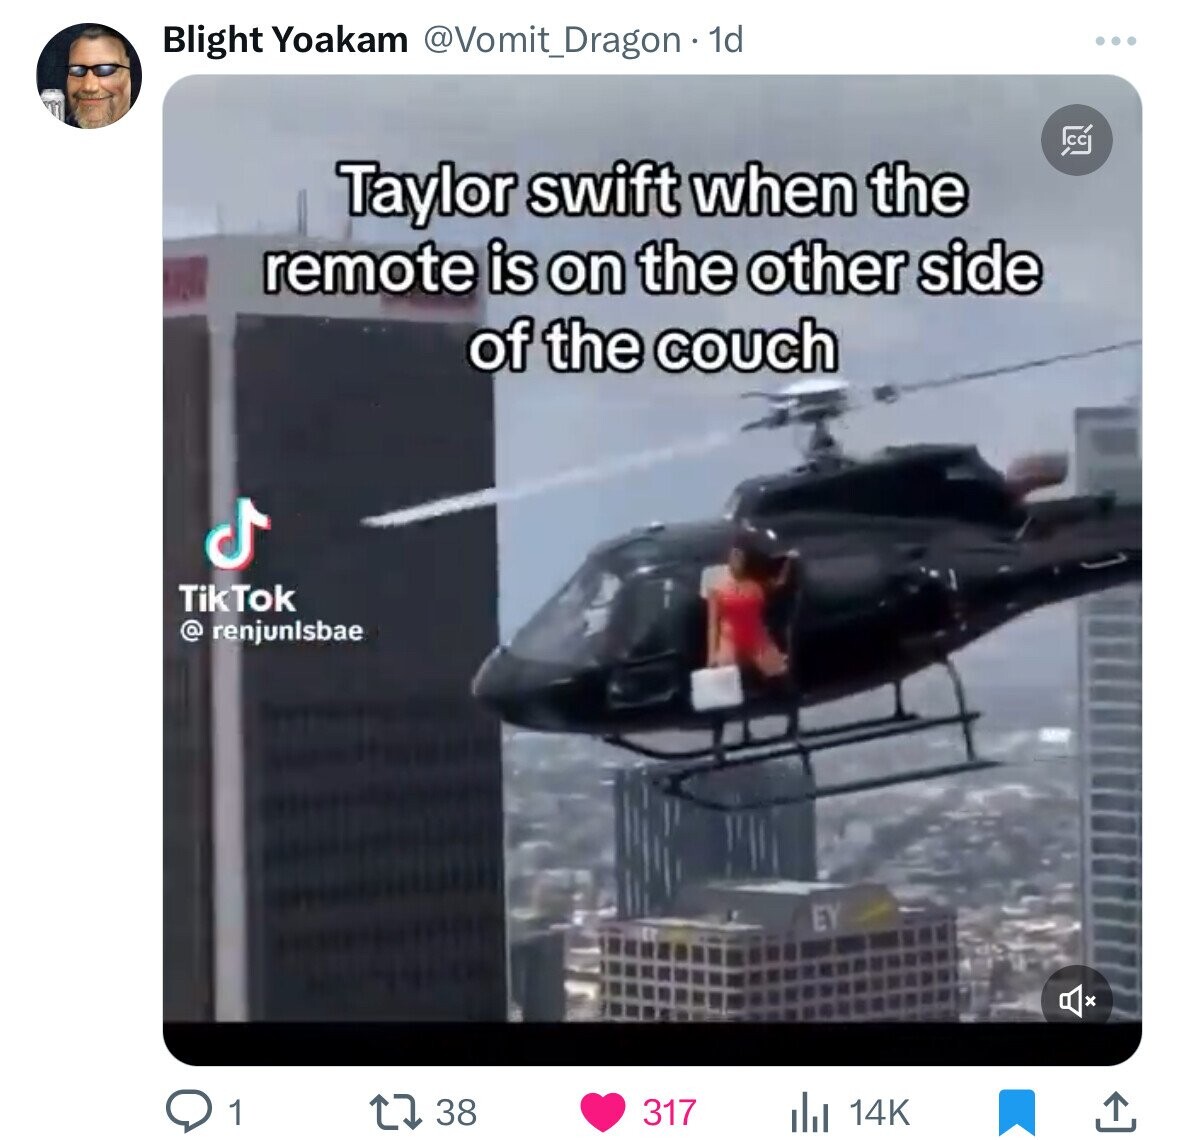 helicopter rotor - Blight Yoakam . 1d Taylor swift when the remote is on the other side of the couch J Tik Tok Q1 138 A